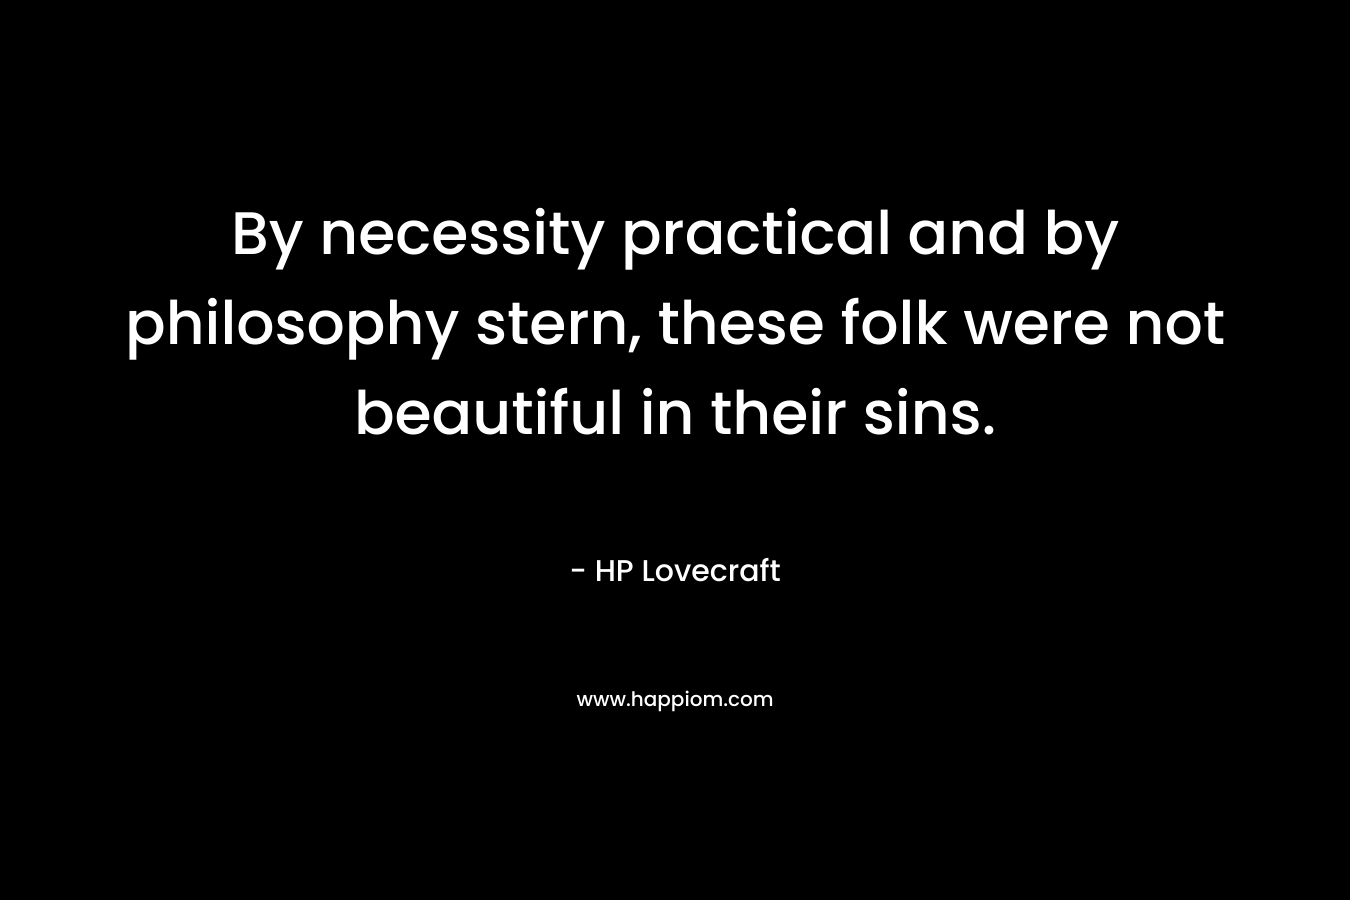 By necessity practical and by philosophy stern, these folk were not beautiful in their sins. – HP Lovecraft